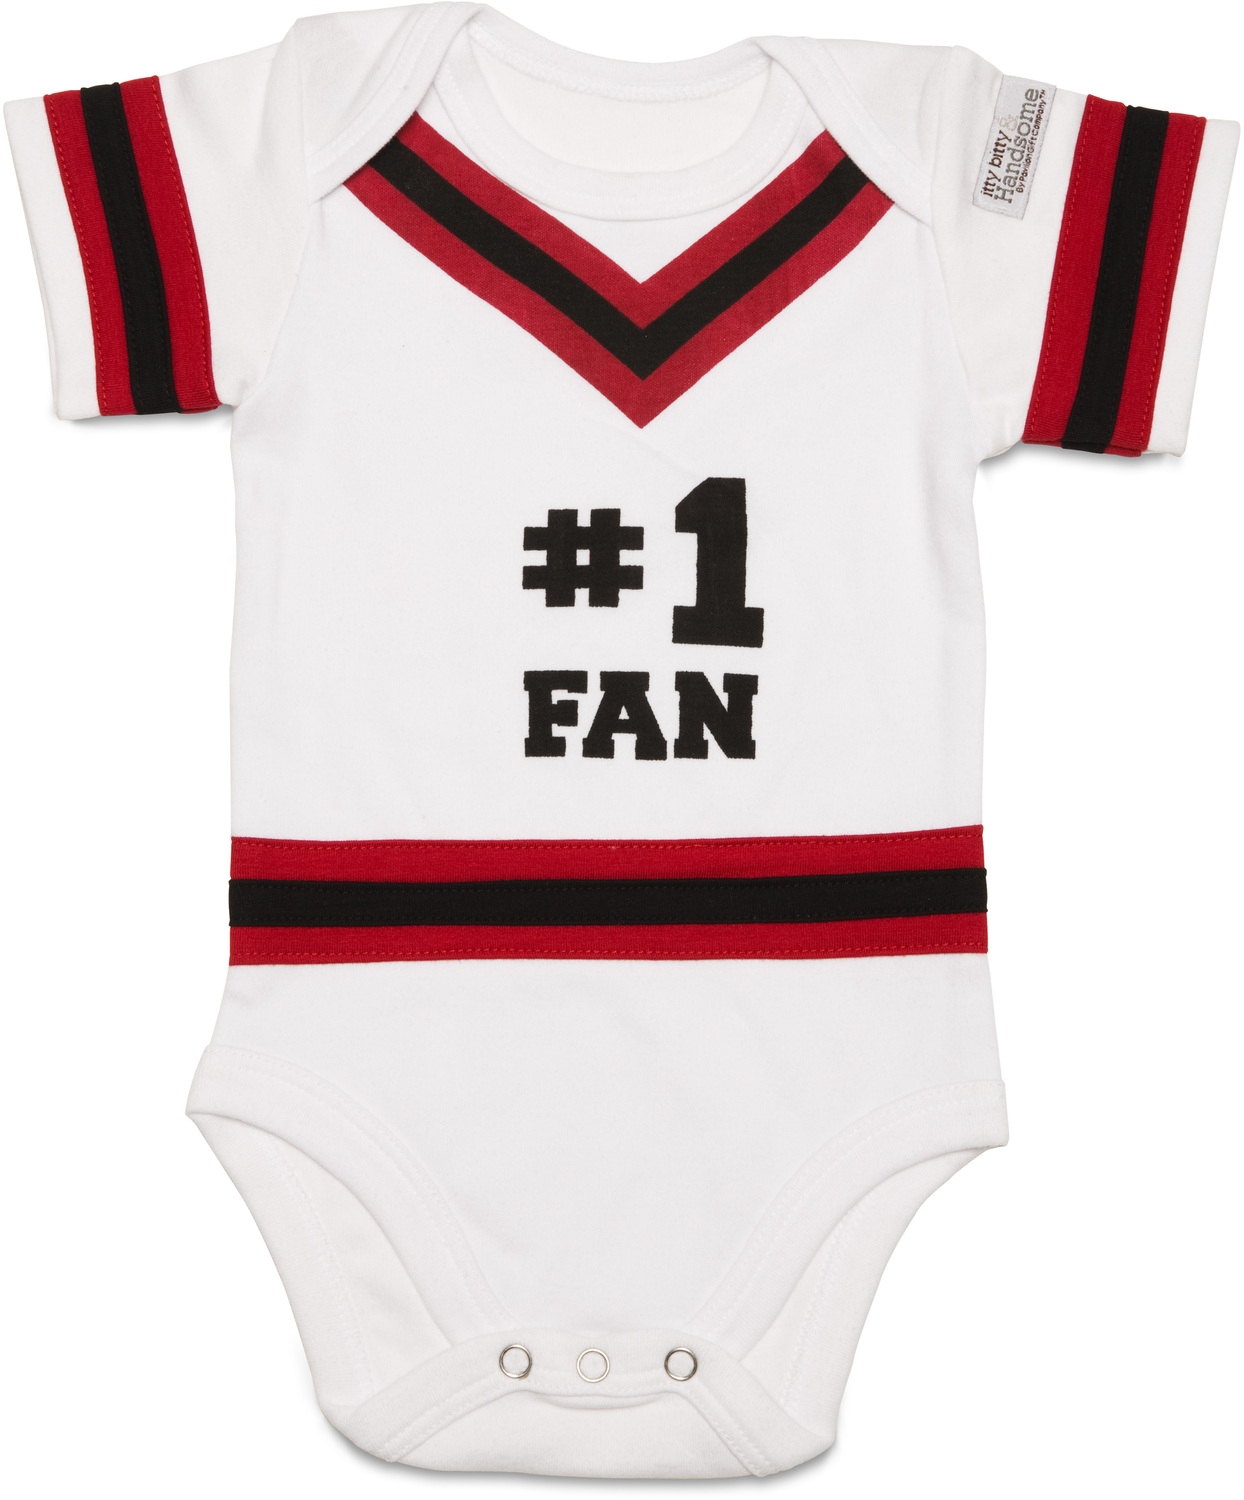 Red & Black by Itty Bitty & Pretty - Red & Black - 0-6 Months Infant Onesie